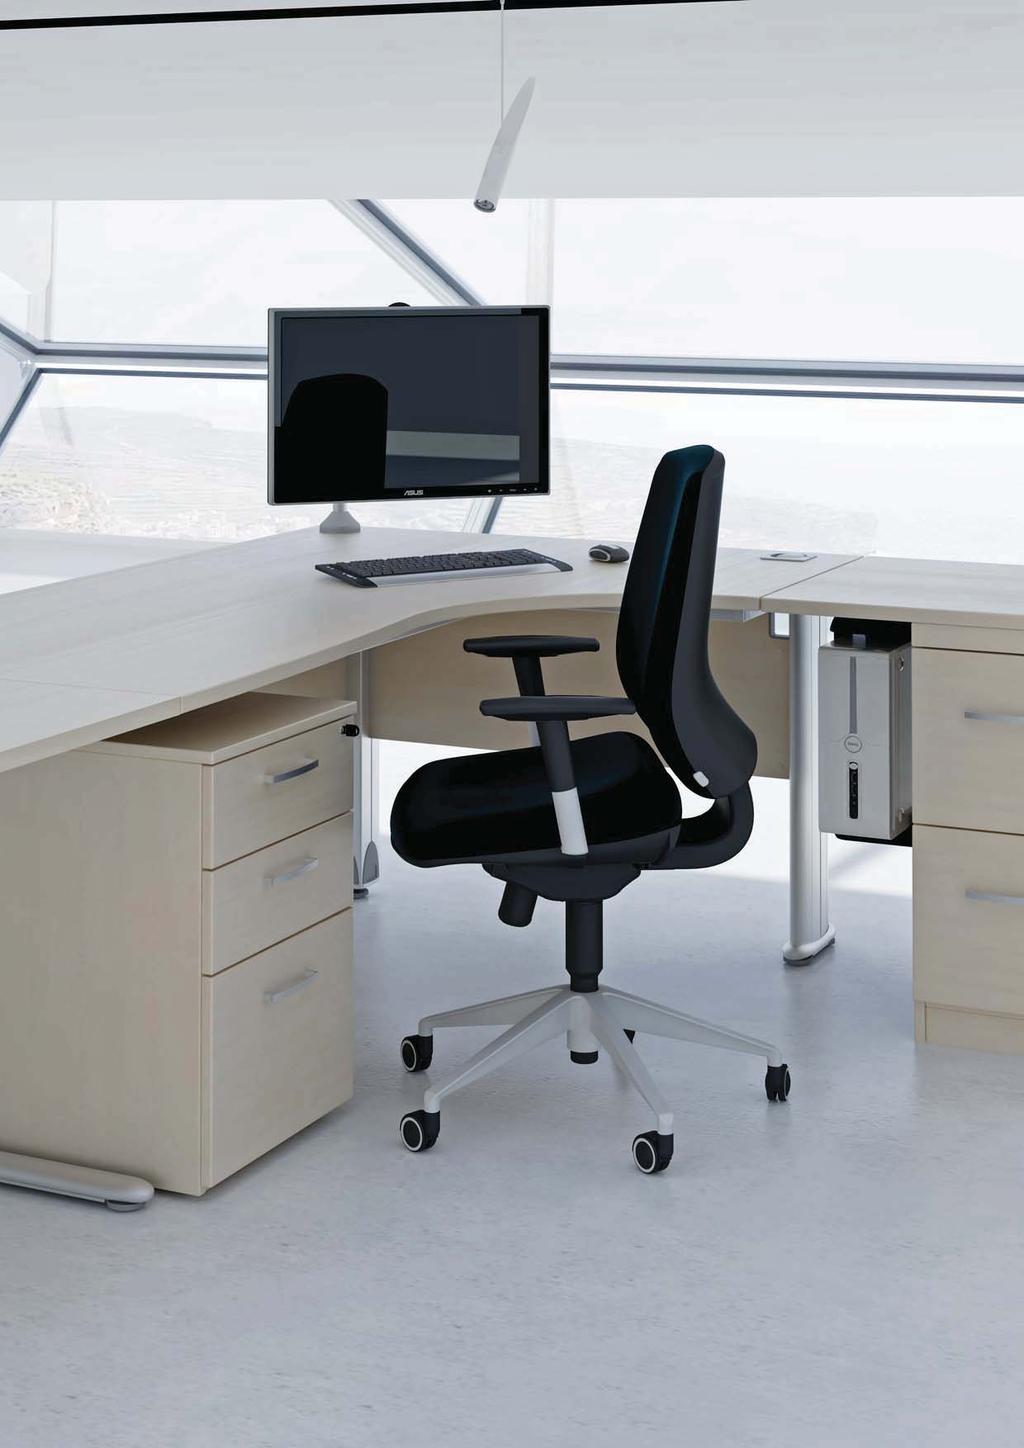 Crescent Workstation Suitable for a managerial or executive position, the Crescent workstation provides space and ergonomics for the user.